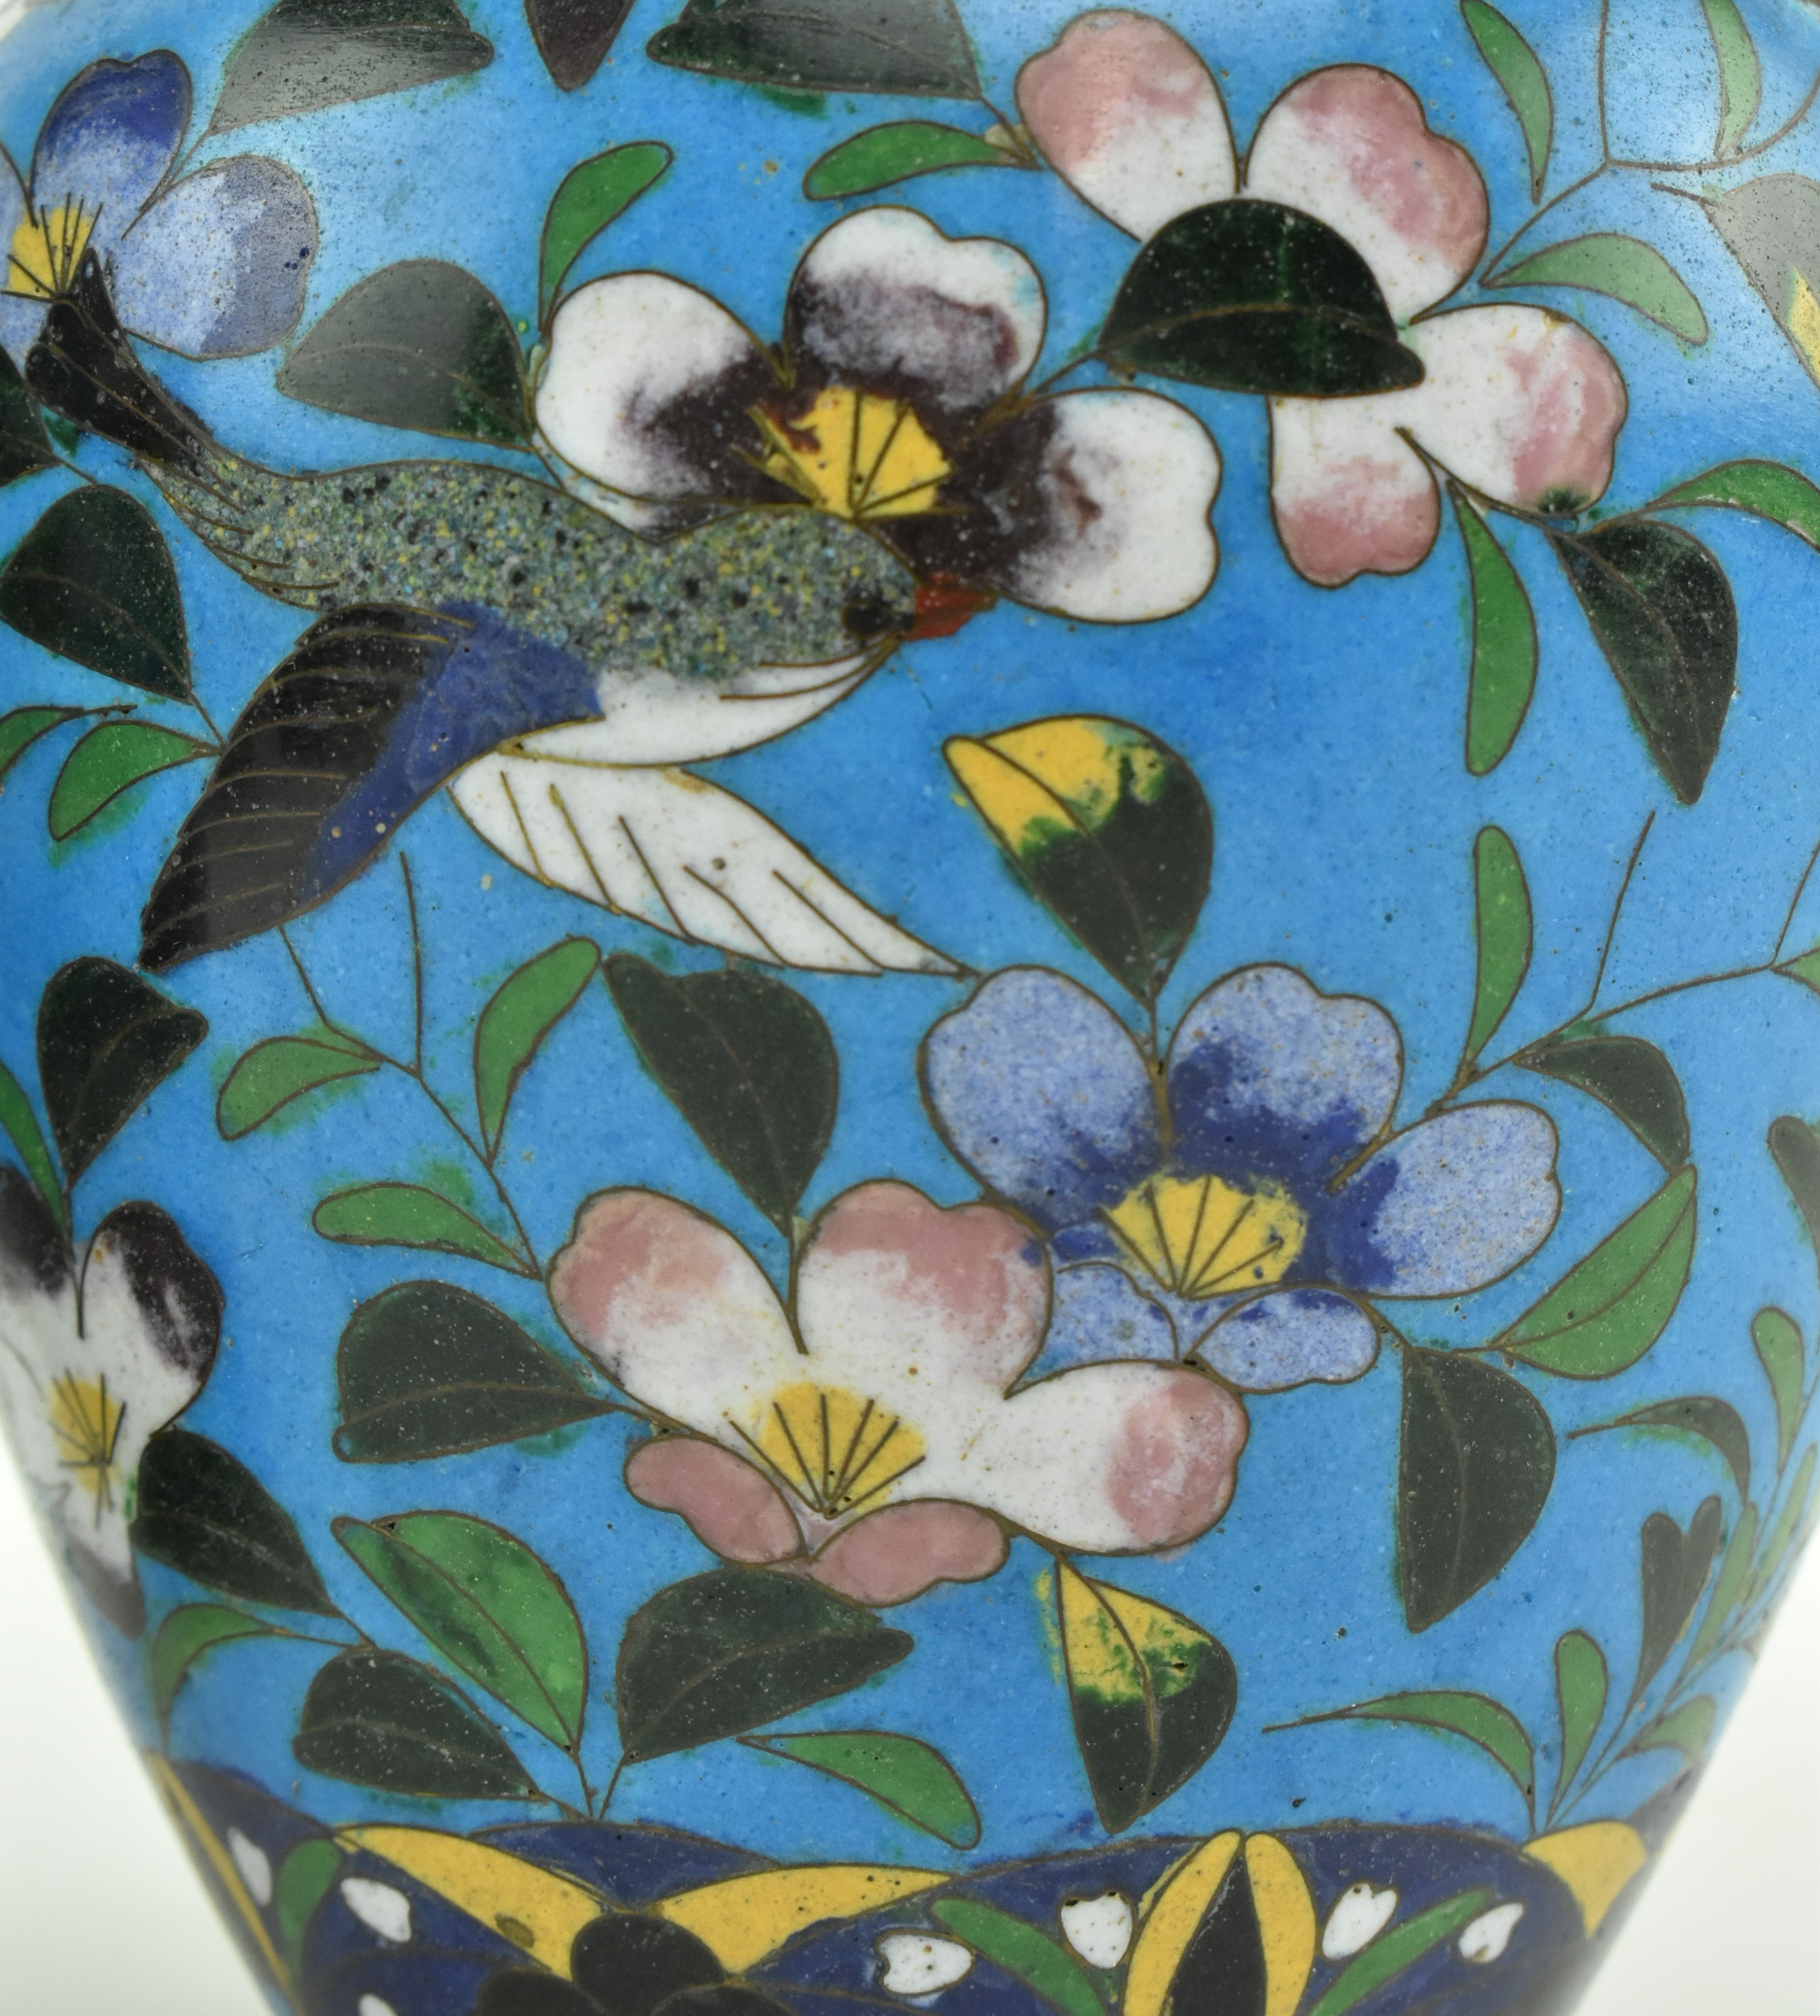 PAIR OF JAPANESE MEIJI PERIOD CLOISONNE JARS WITH COVER - Image 4 of 6